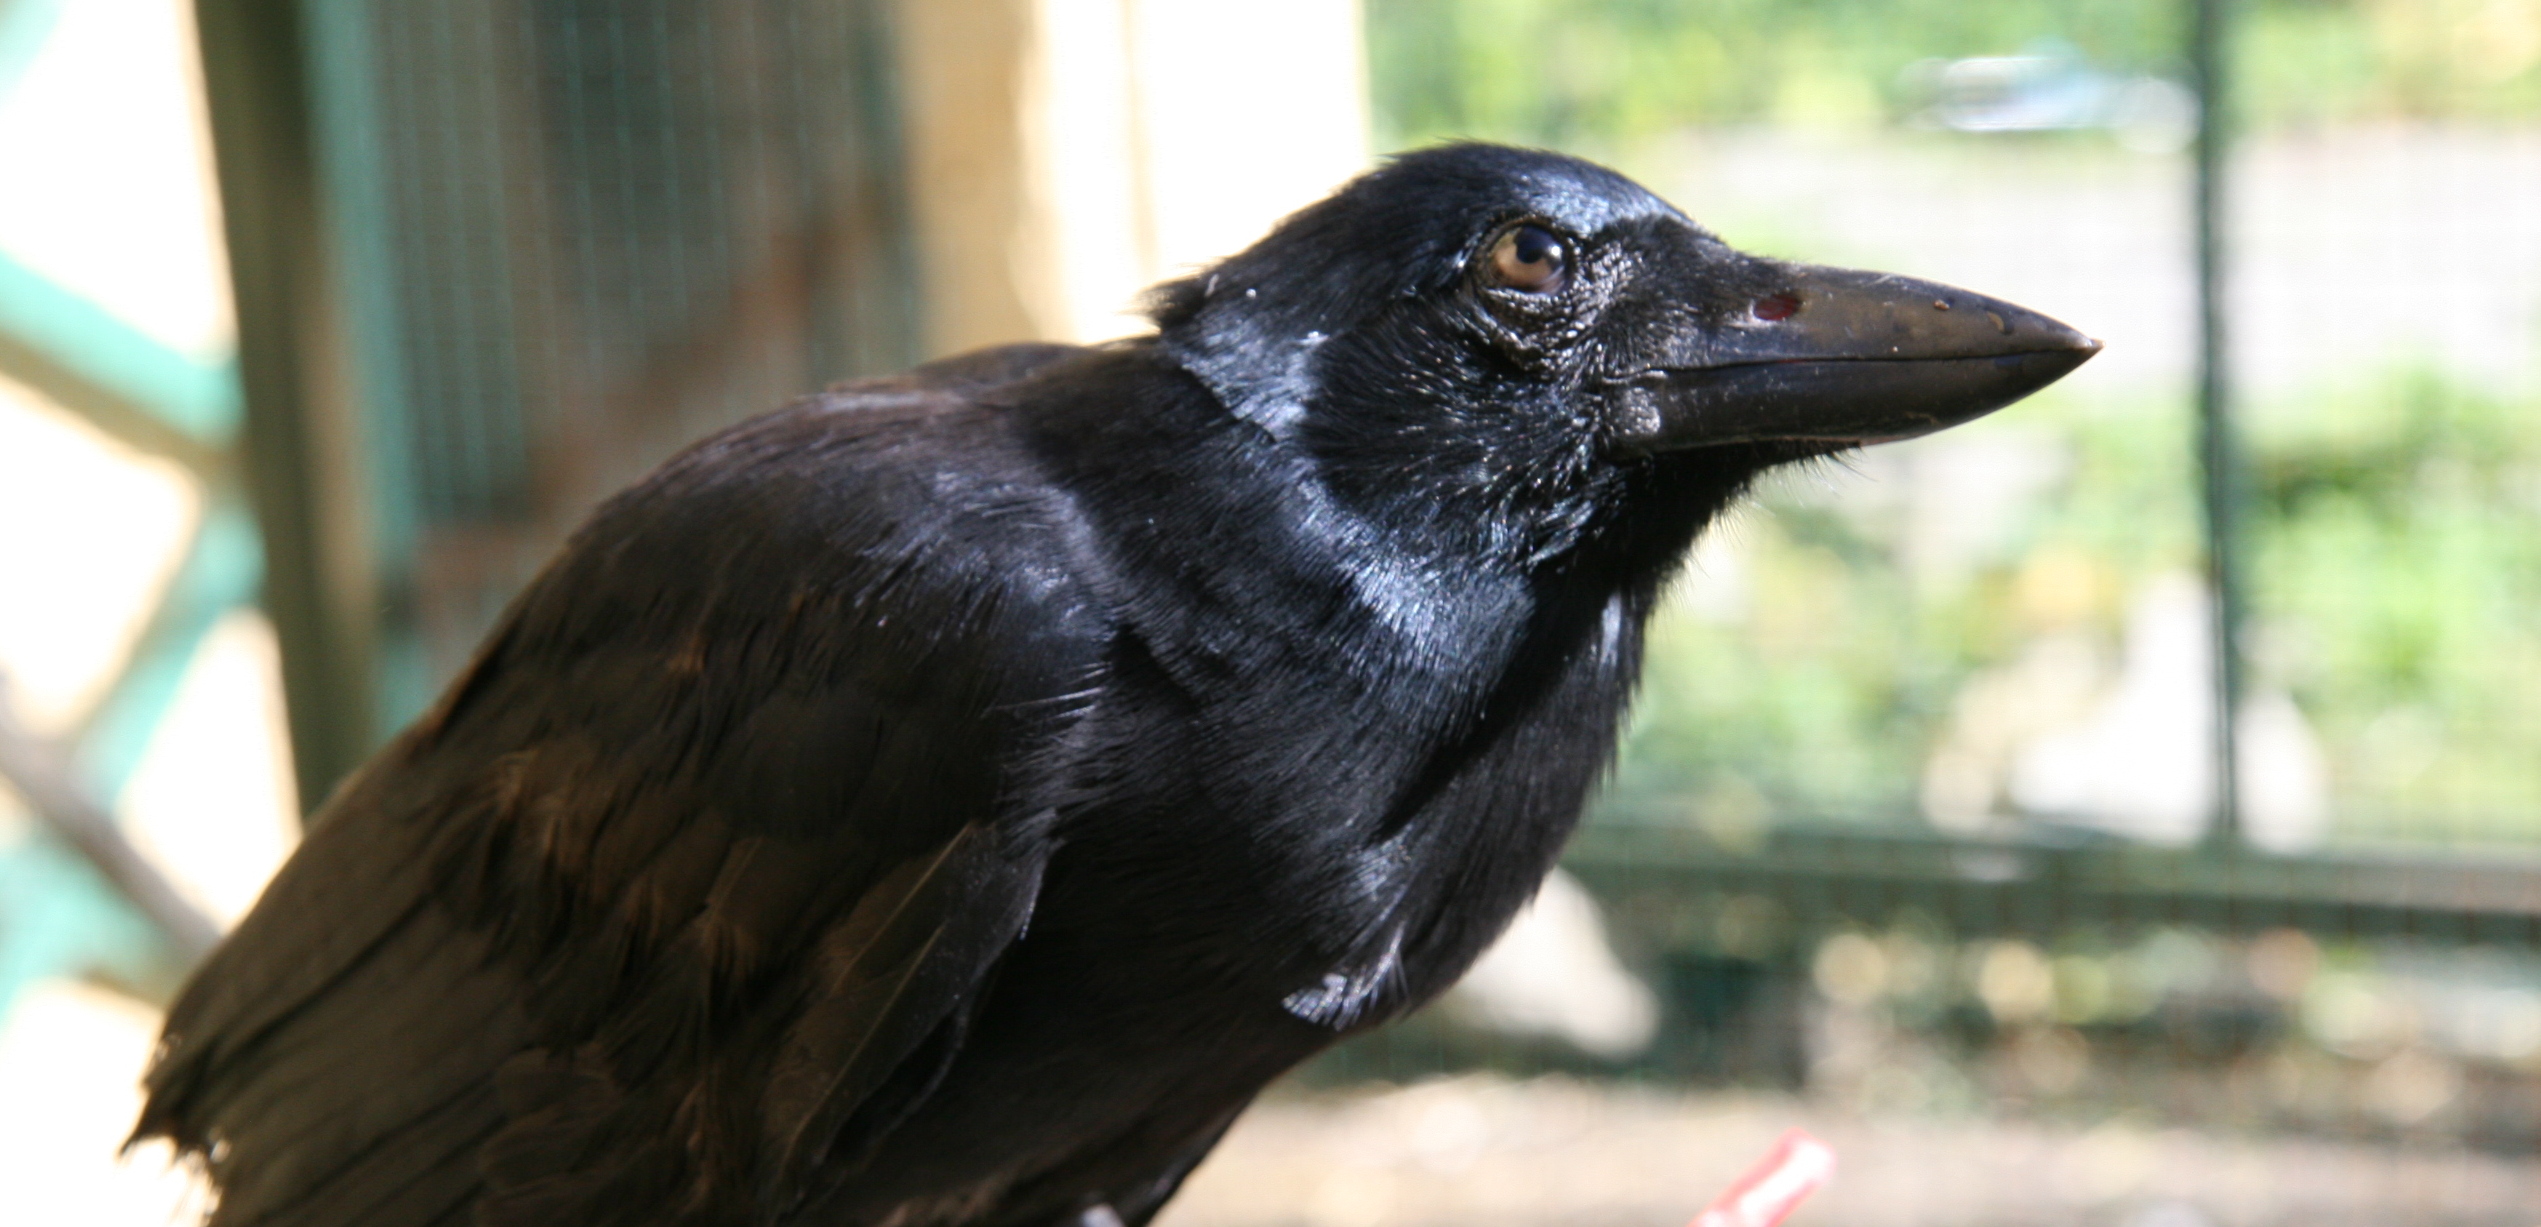 New Caledonian crows can create tools from multiple parts |